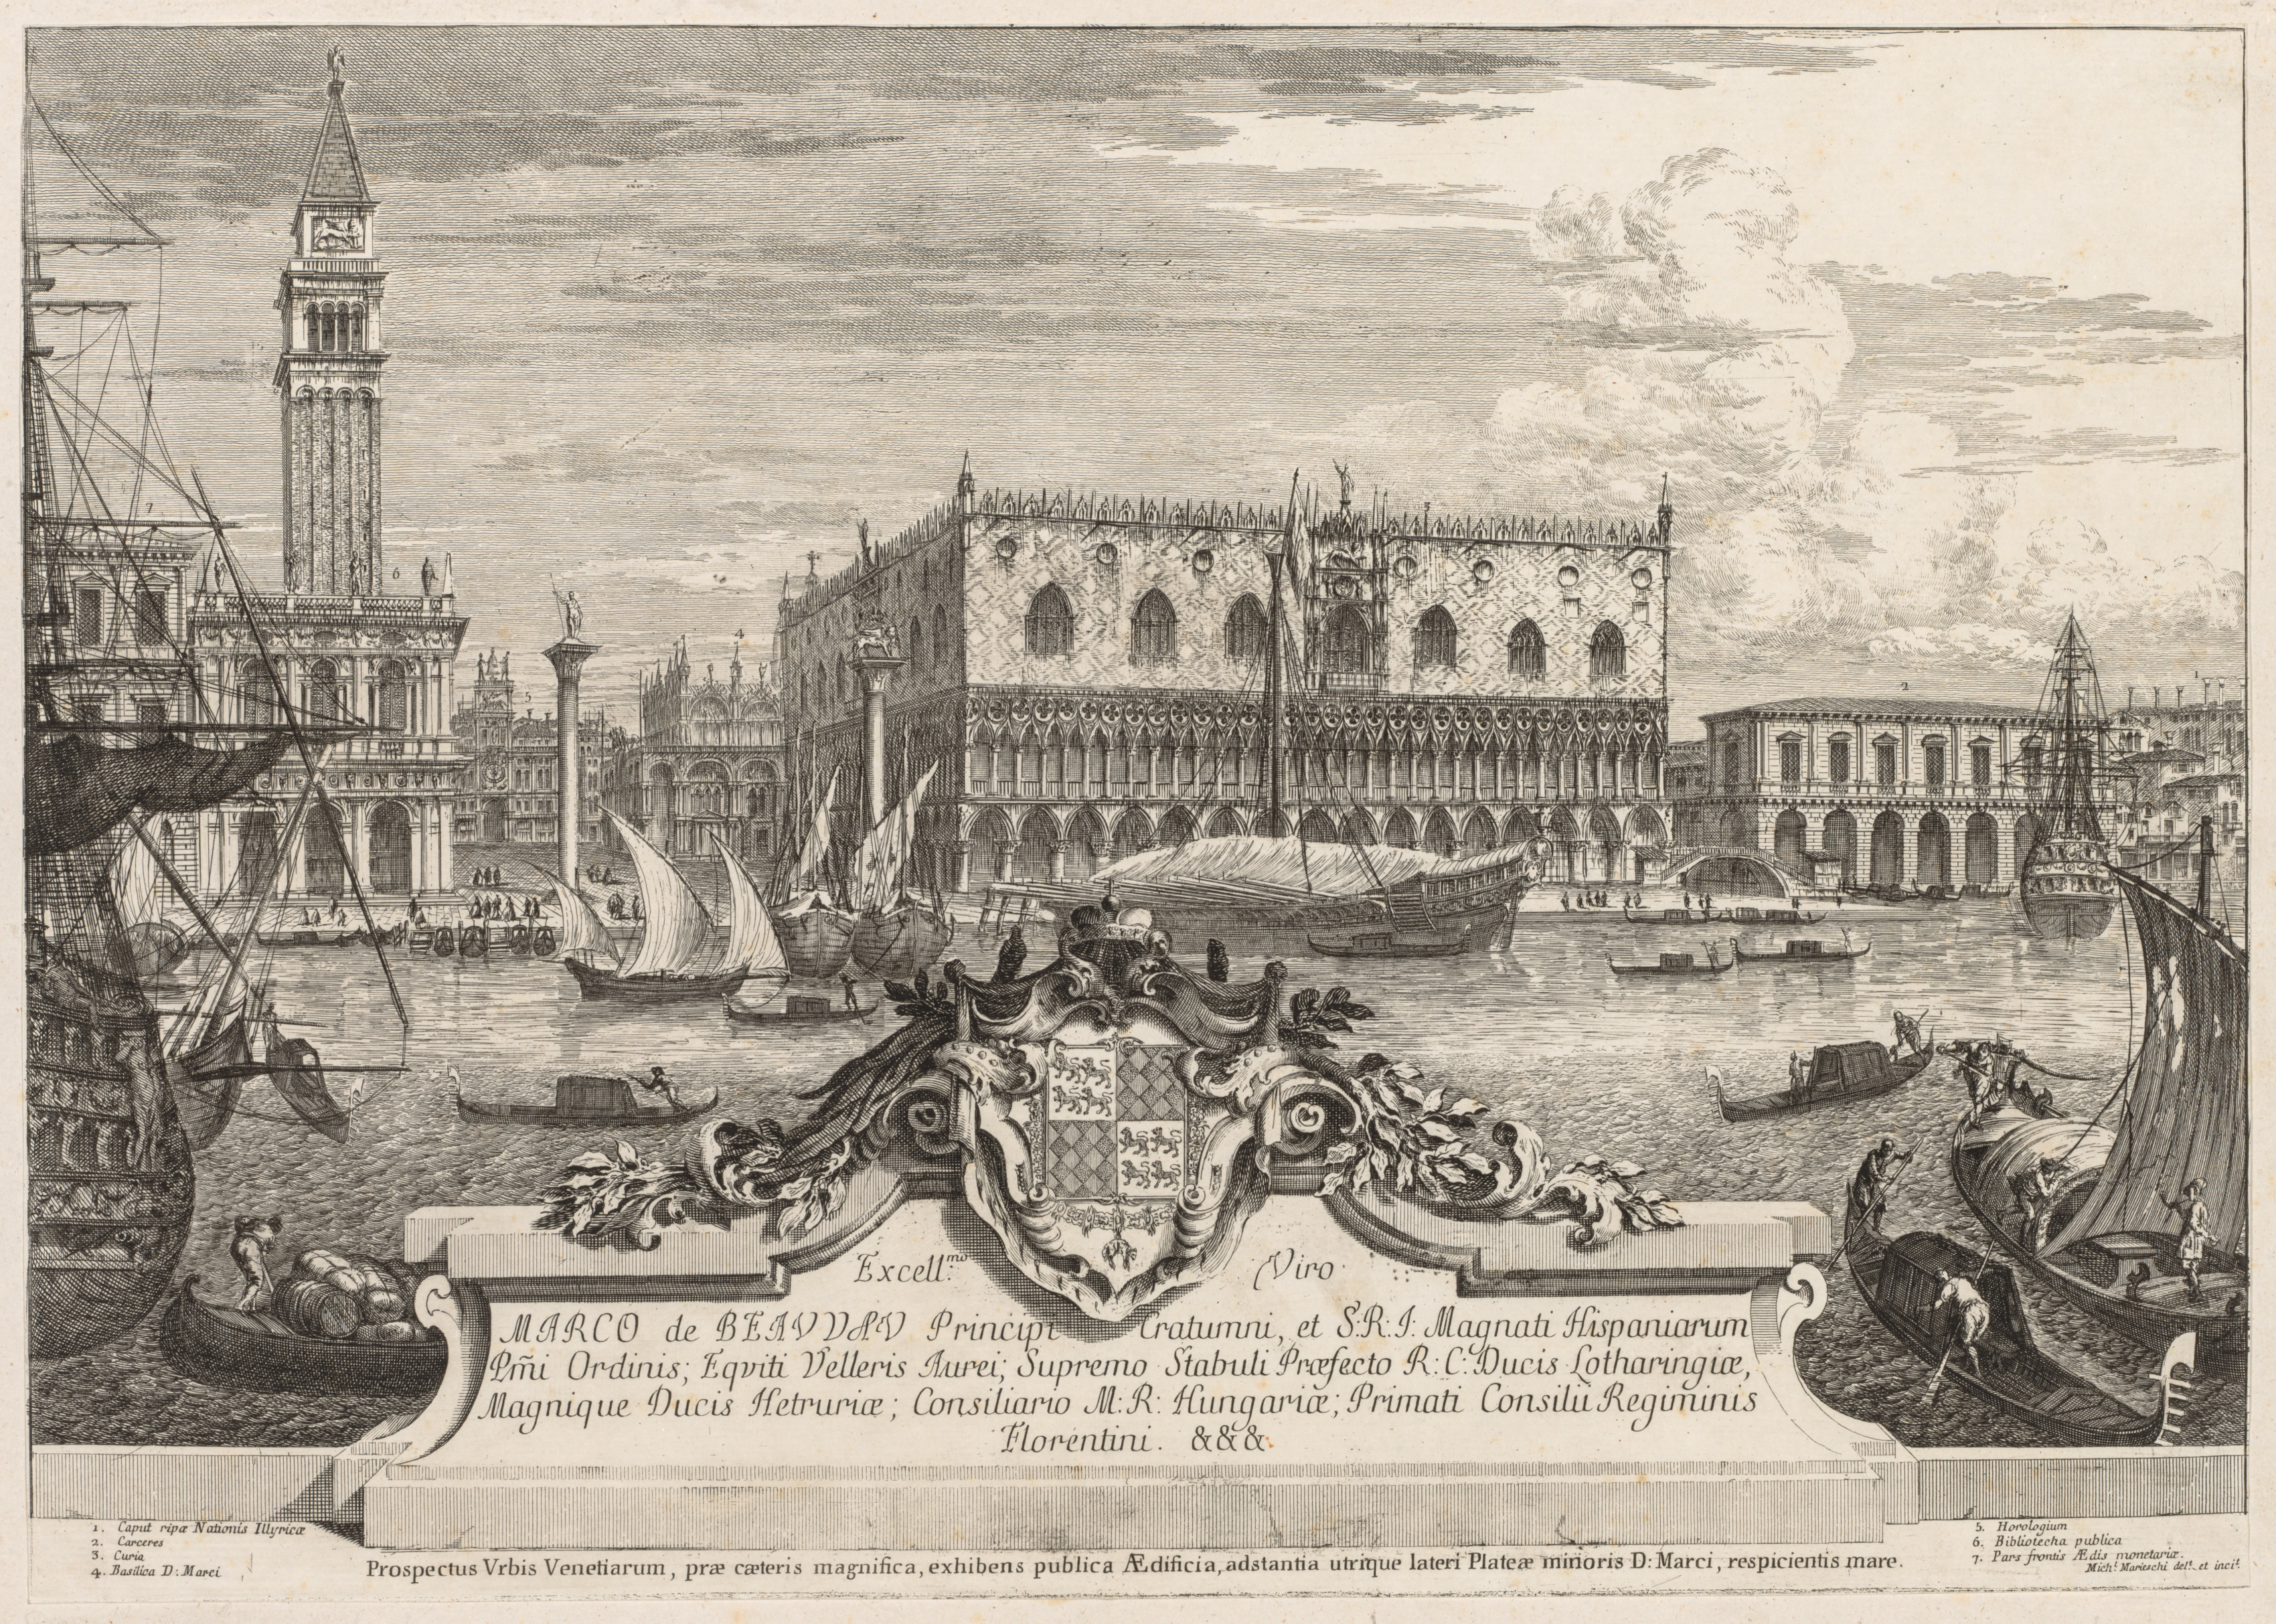 Views of Venice:  The Piazzetta and Ducal Palace